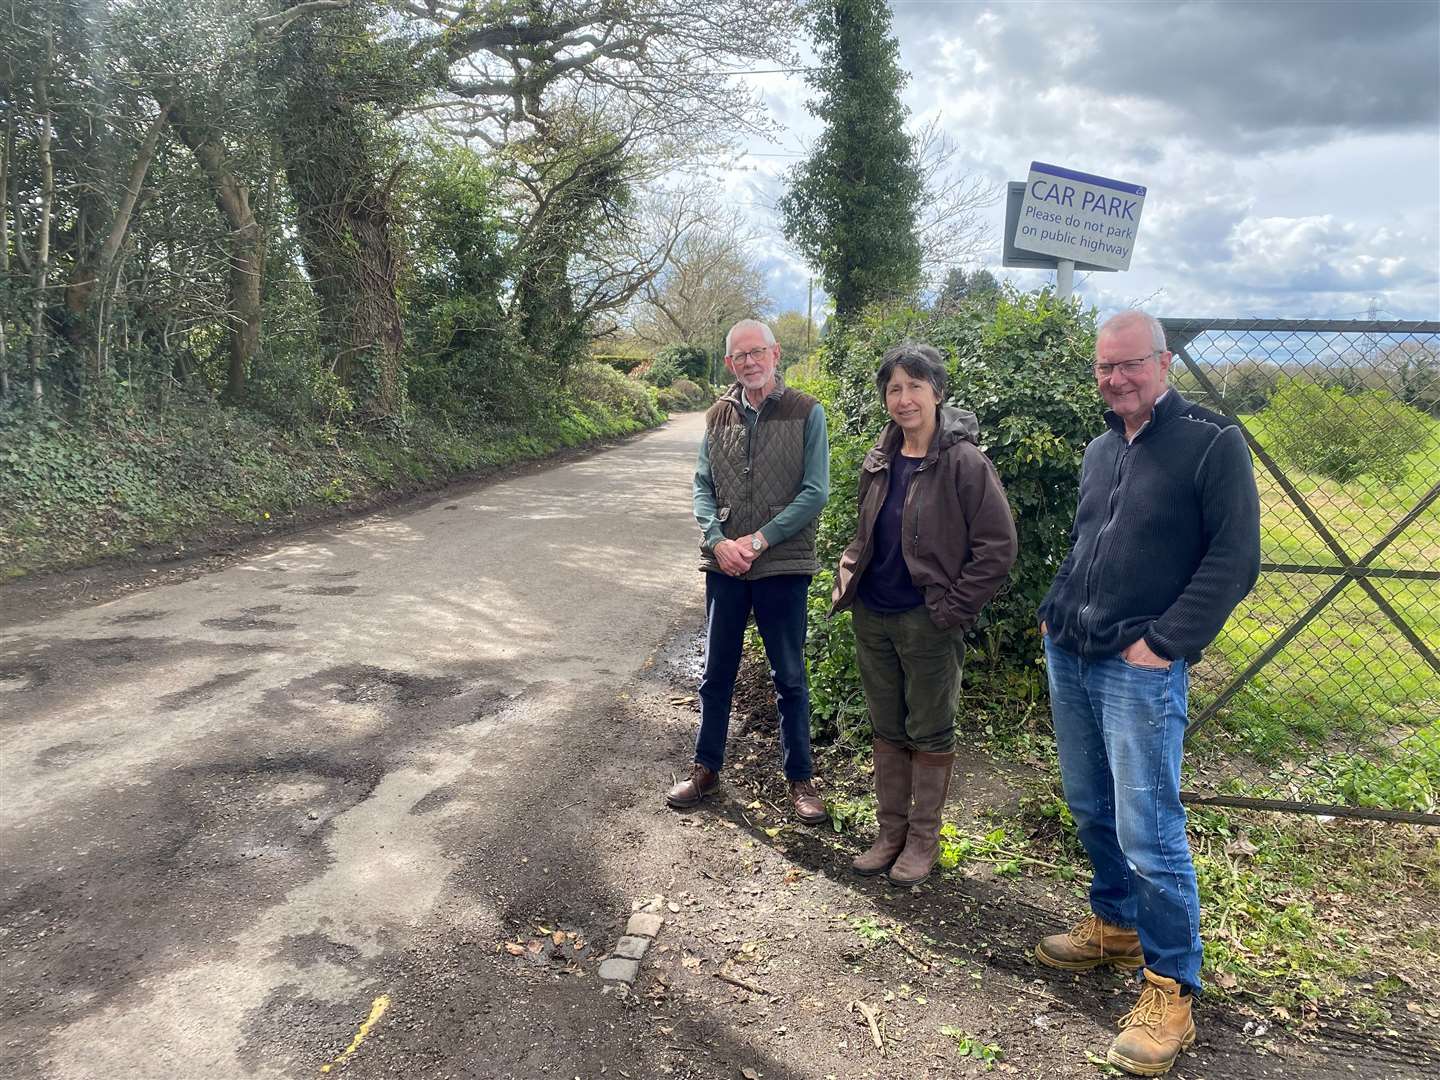 Anthony O'Sullivan, Jane Burt and Chris Harris have joined forces to raise awareness of the awful condition of Stodmarsh Road